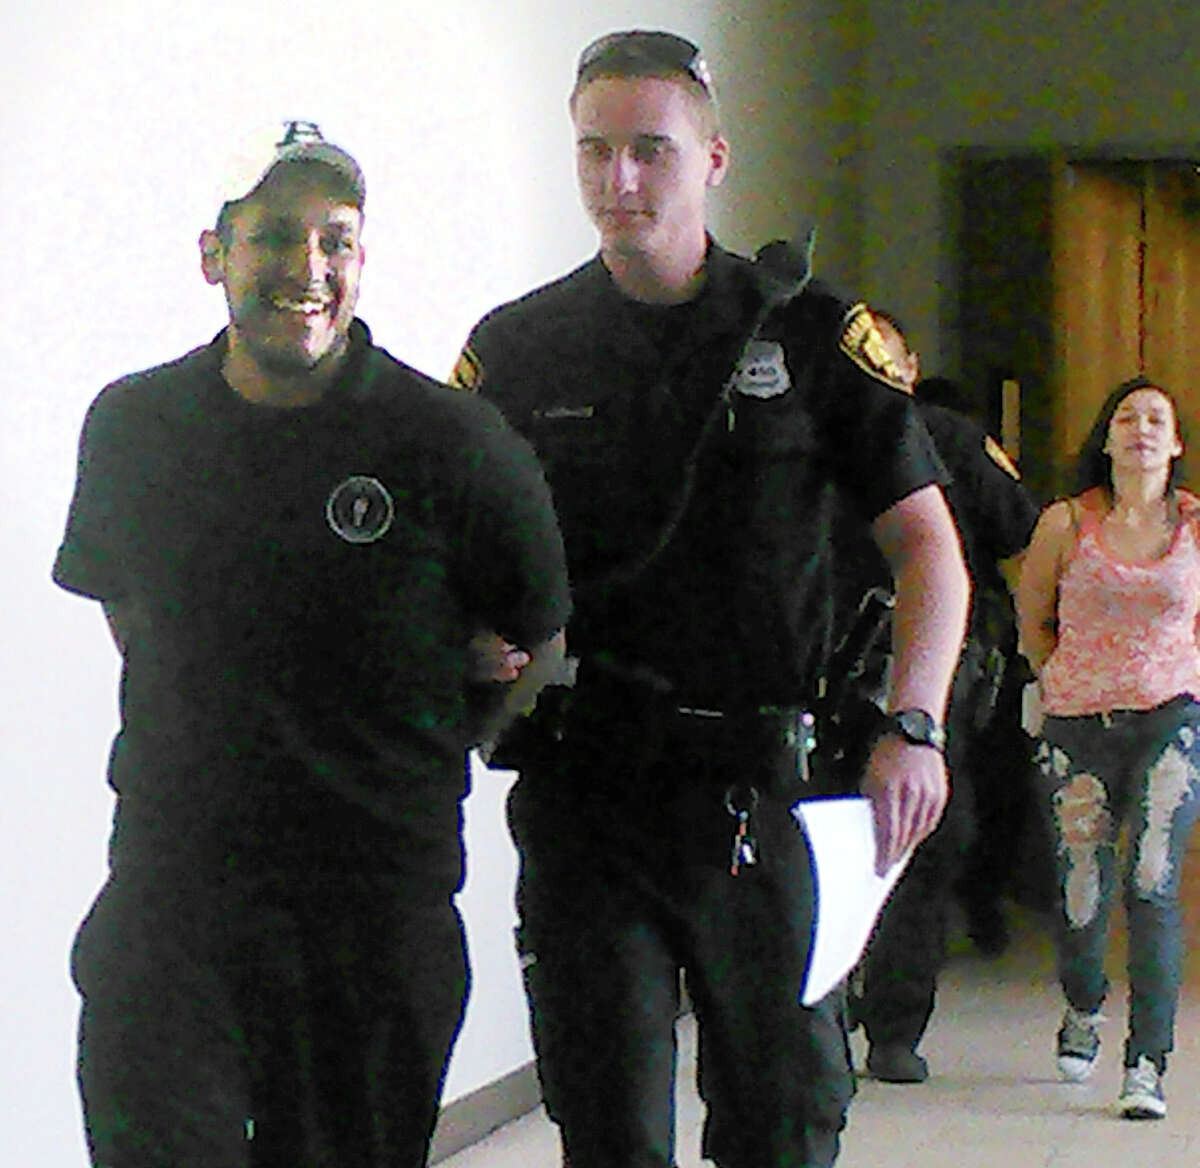 Joe Martinez, 24, left, was arrested April 4 on a warrant for the 2010 killing of David Valdez. His then-girlfriend, in background, Rebecca Rodriguez, 23, was also arrested on a charge of felony theft.